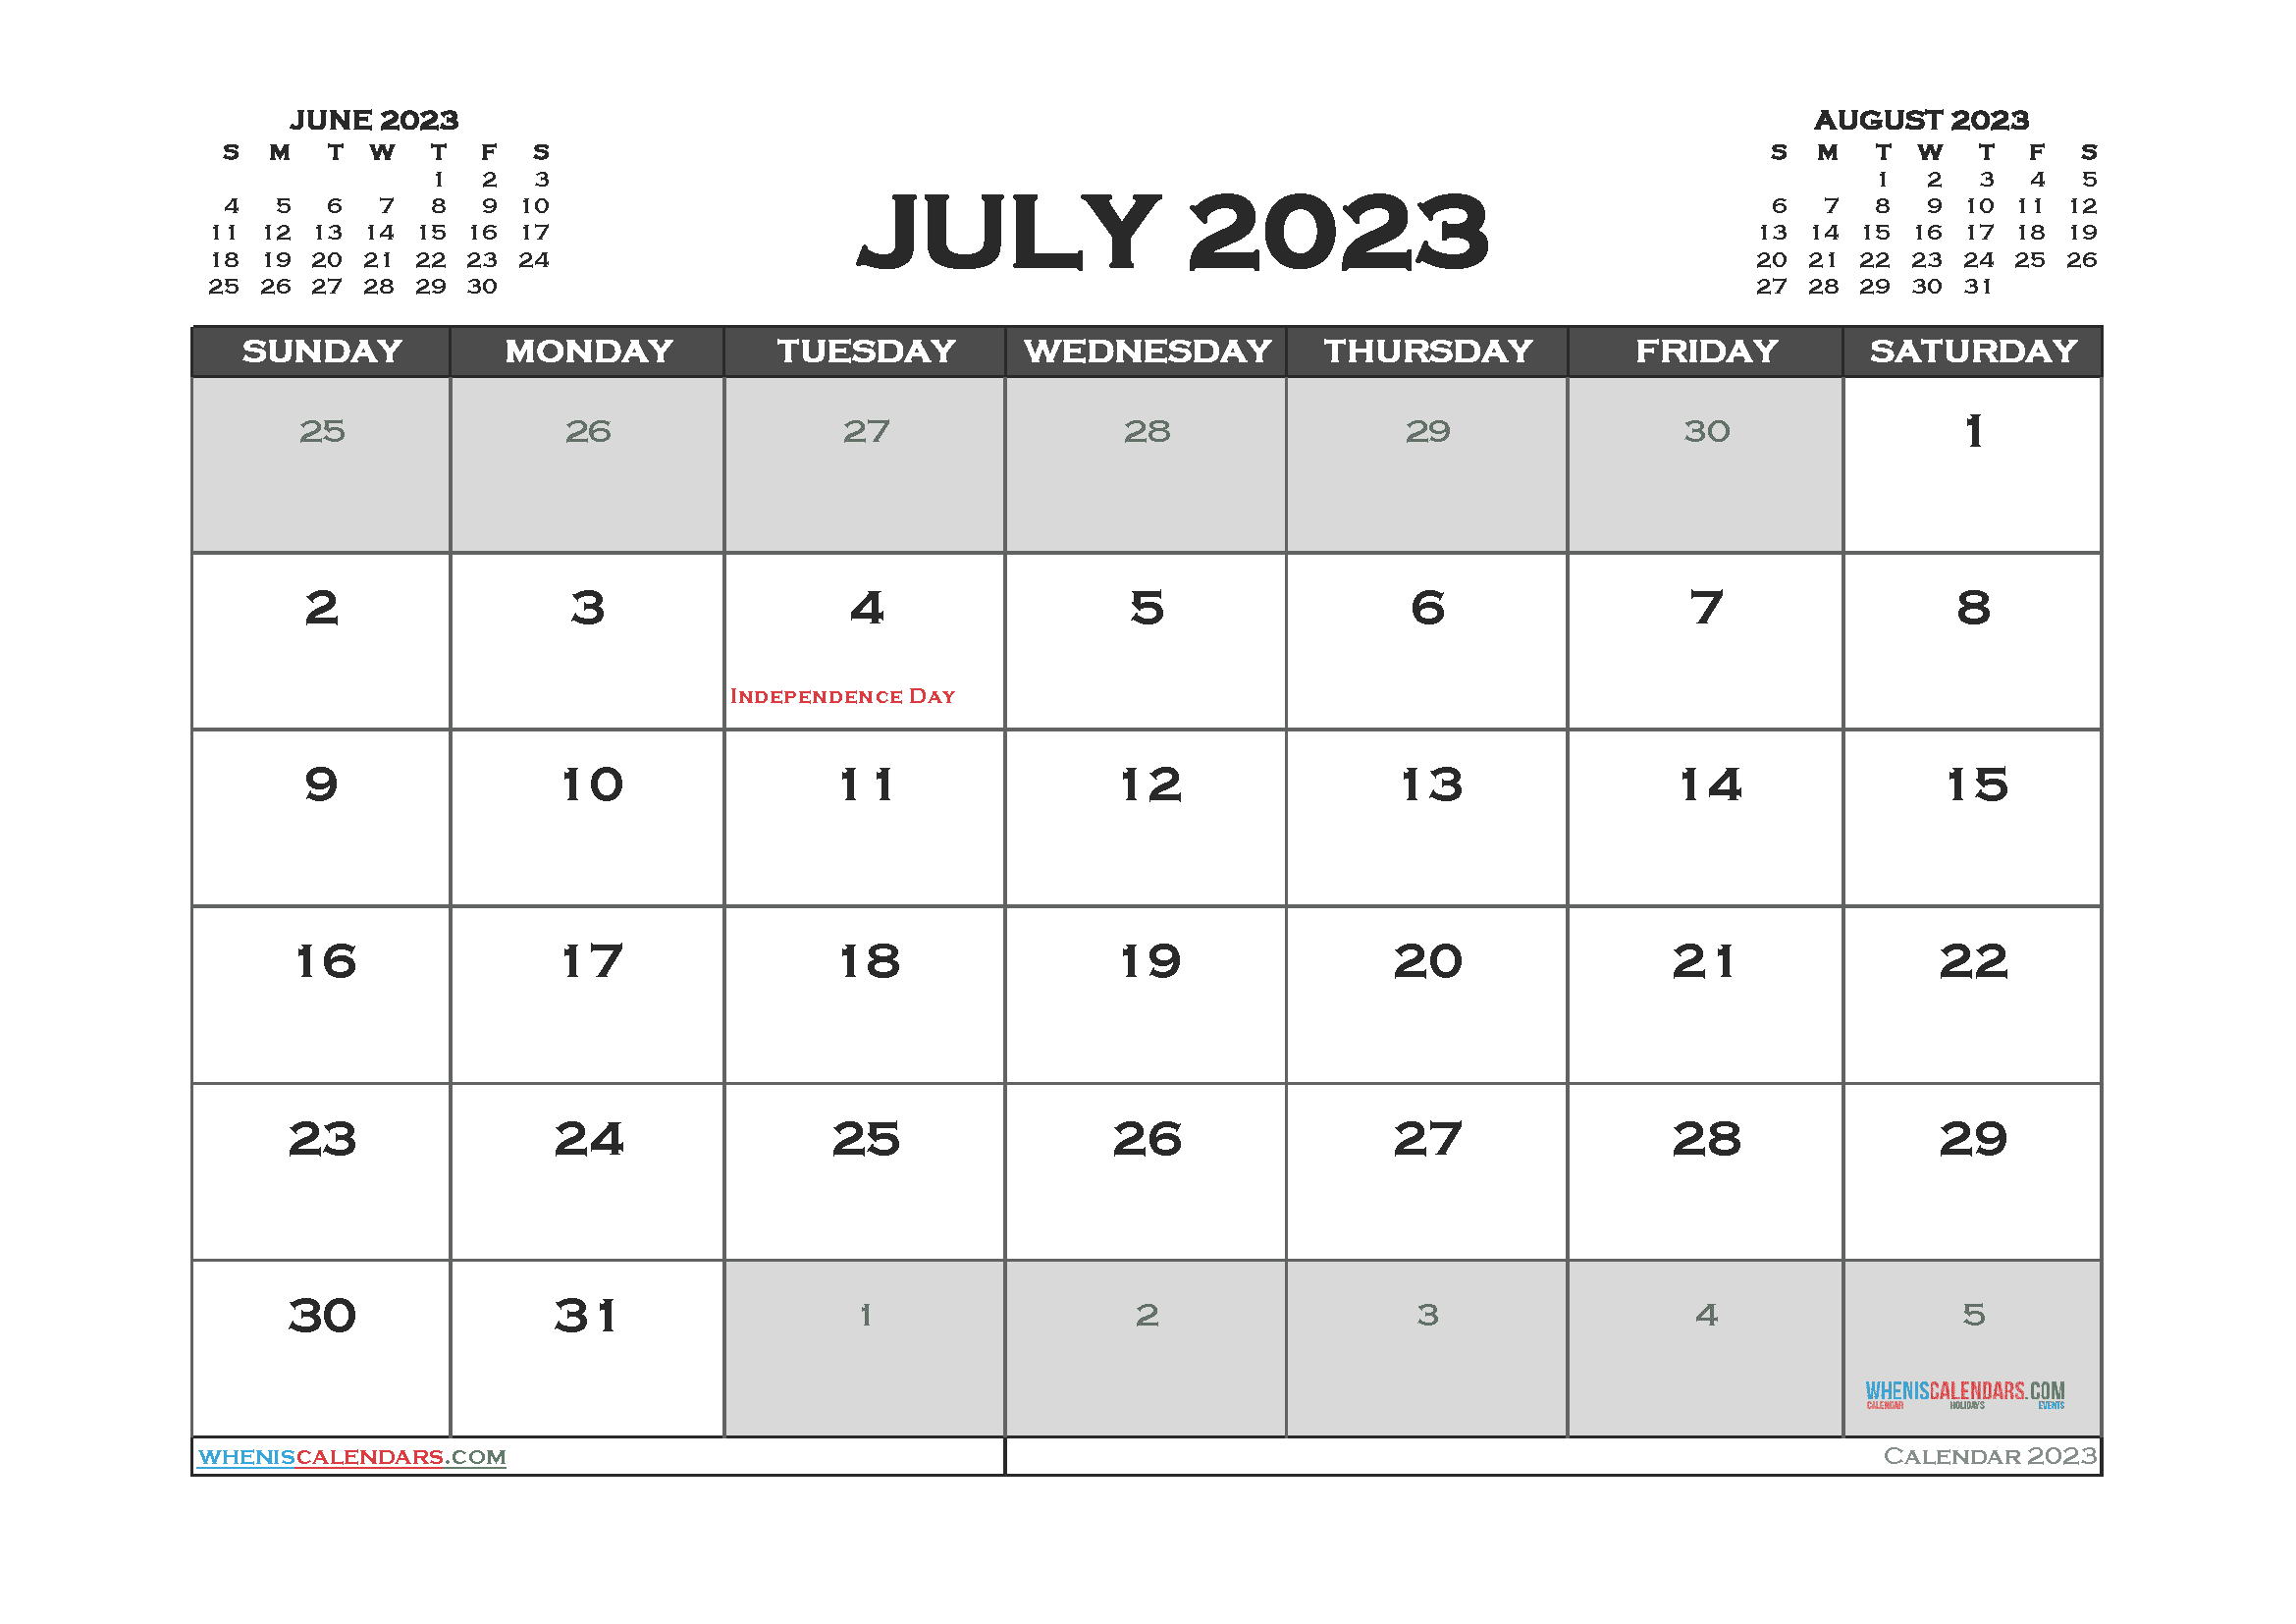 Free Calendar 2023 July with Holidays PDF in Landscape